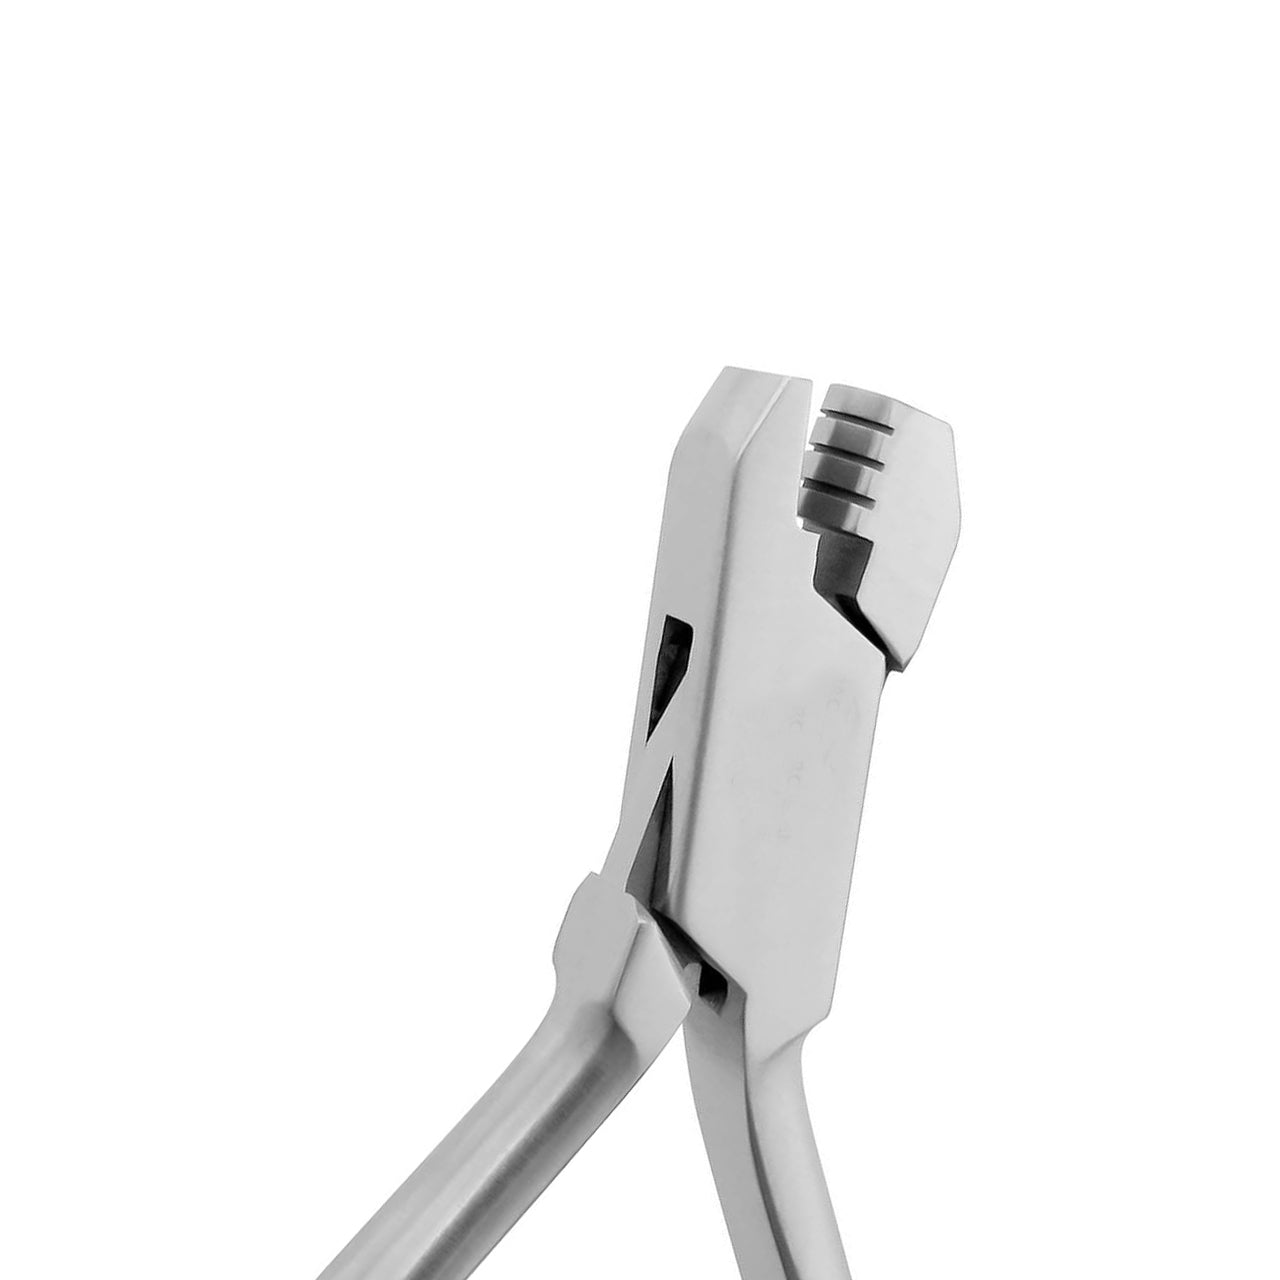 Arch Contouring Pliers